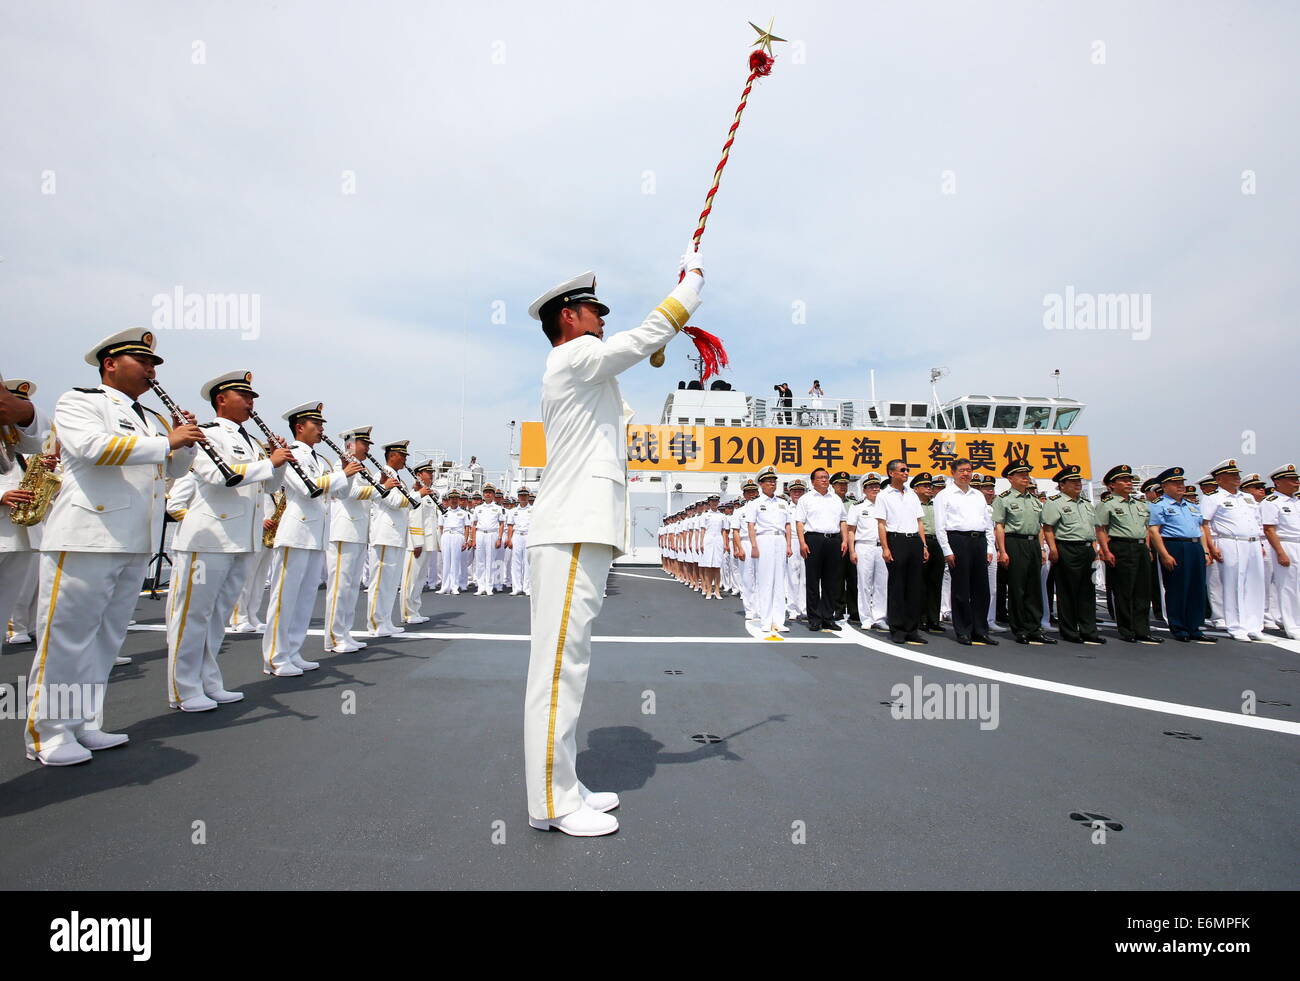 Weihai, China's Shandong Province. 27th Aug, 2014. A ceremony is held to commemorate the 120th anniversary of the First Sino-Japanese War of 1894-1895 on a ship in a port of Weihai, east China's Shandong Province, Aug. 27, 2014. The People's Liberation Army (PLA) Navy on Wednesday held a memorial ceremony for the First Sino-Japanese War of 1894-1895, also known as the Jiawu War, in a Weihai port. Credit:  Zha Chunming/Xinhua/Alamy Live News Stock Photo